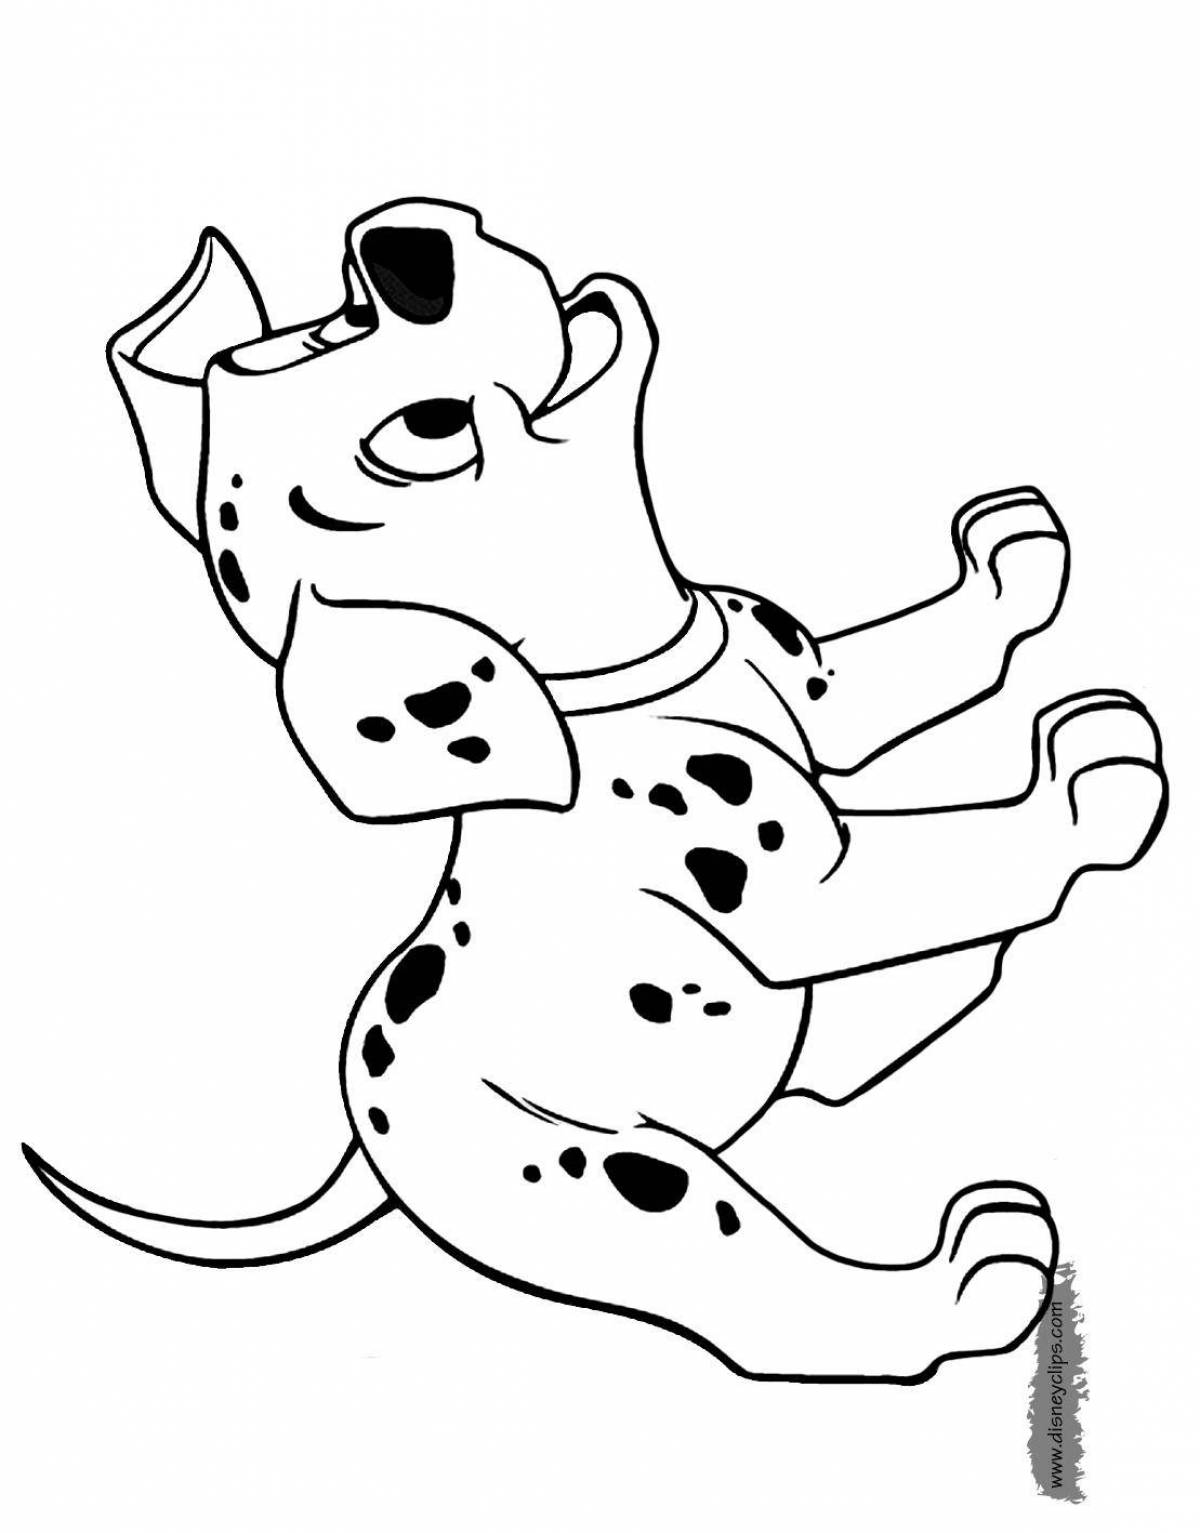 Exquisite dalmatian coloring book for kids